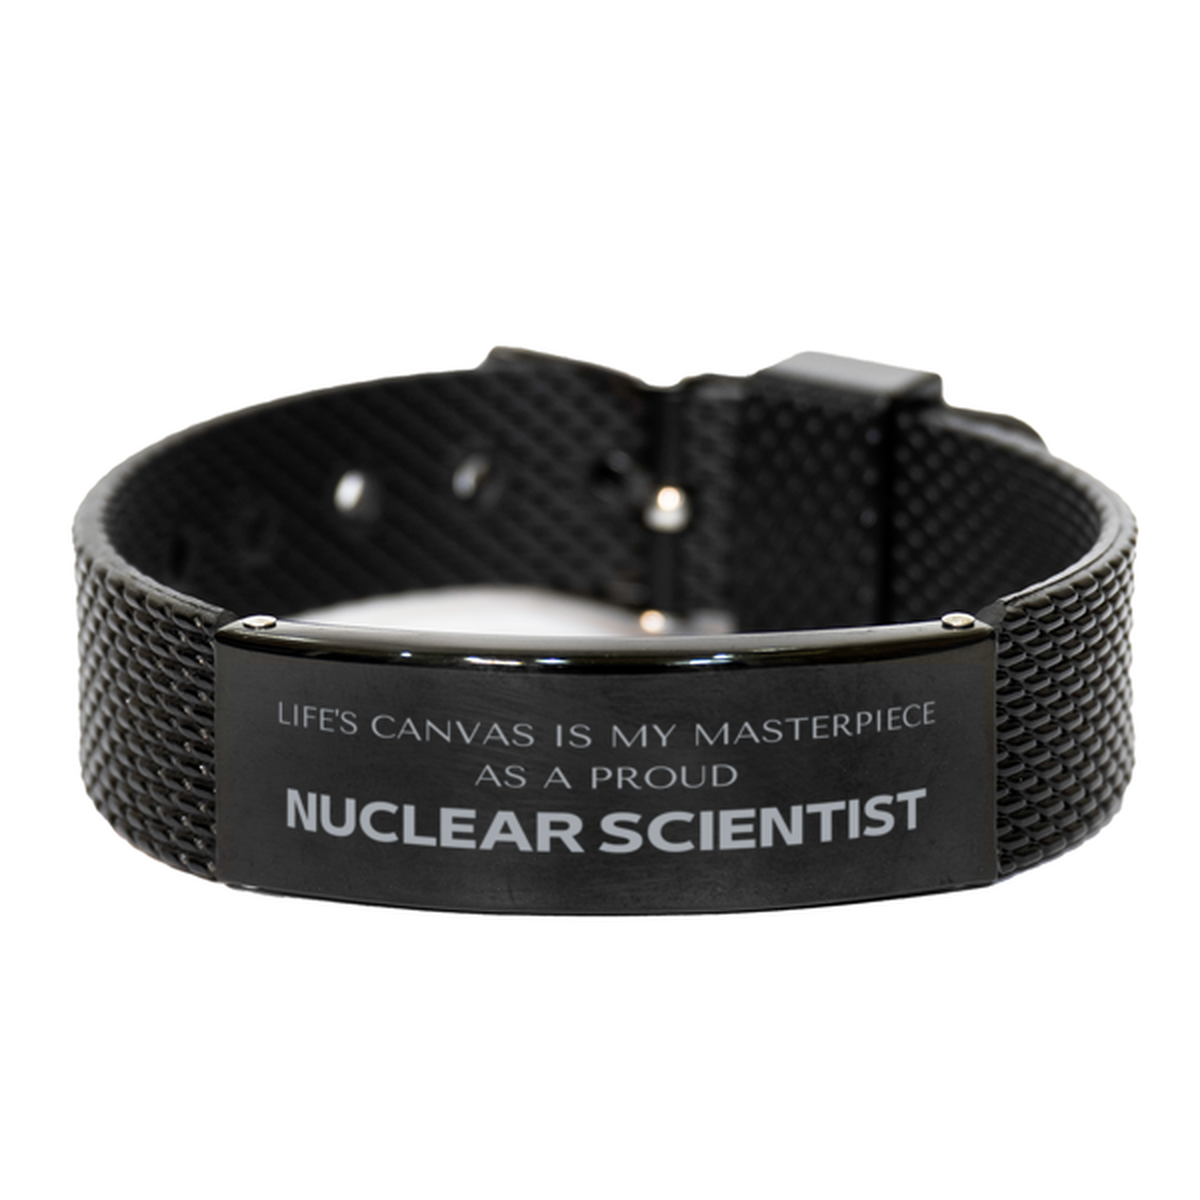 Proud Nuclear Scientist Gifts, Life's canvas is my masterpiece, Epic Birthday Christmas Unique Black Shark Mesh Bracelet For Nuclear Scientist, Coworkers, Men, Women, Friends